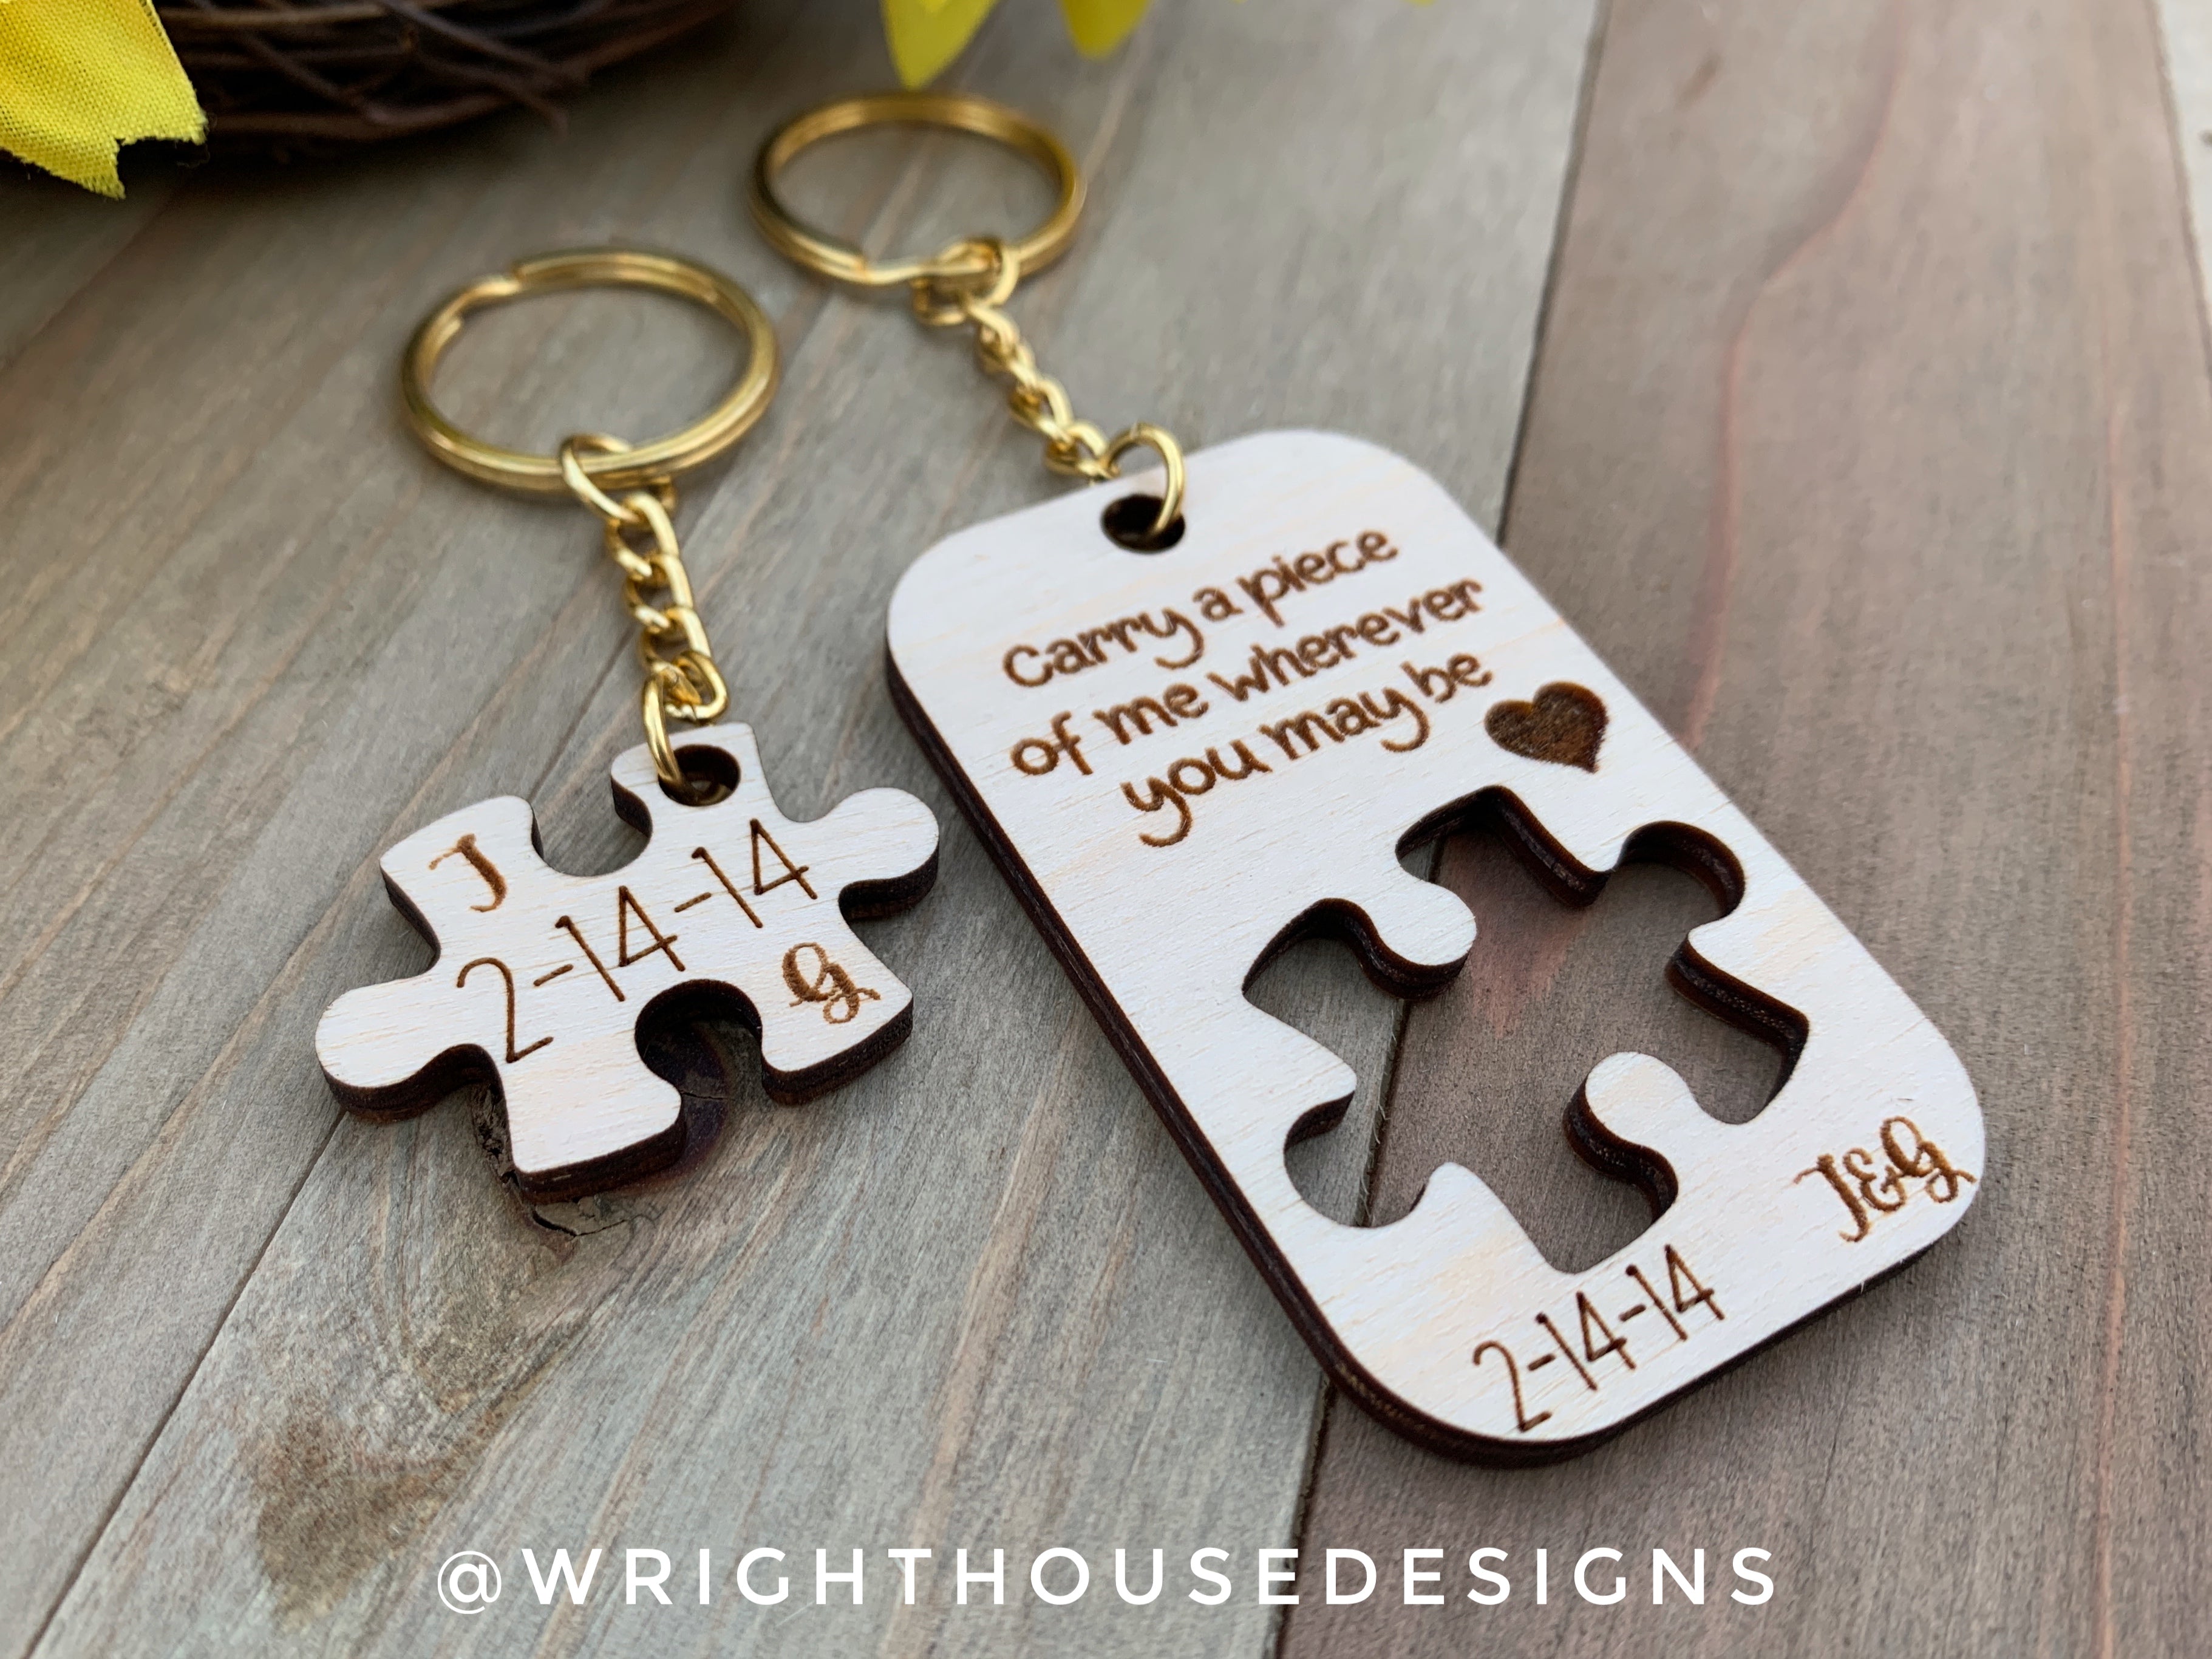 Carry a Piece of Me Wherever You May Be - Couples Interlocking Wooden Personalized Keychain